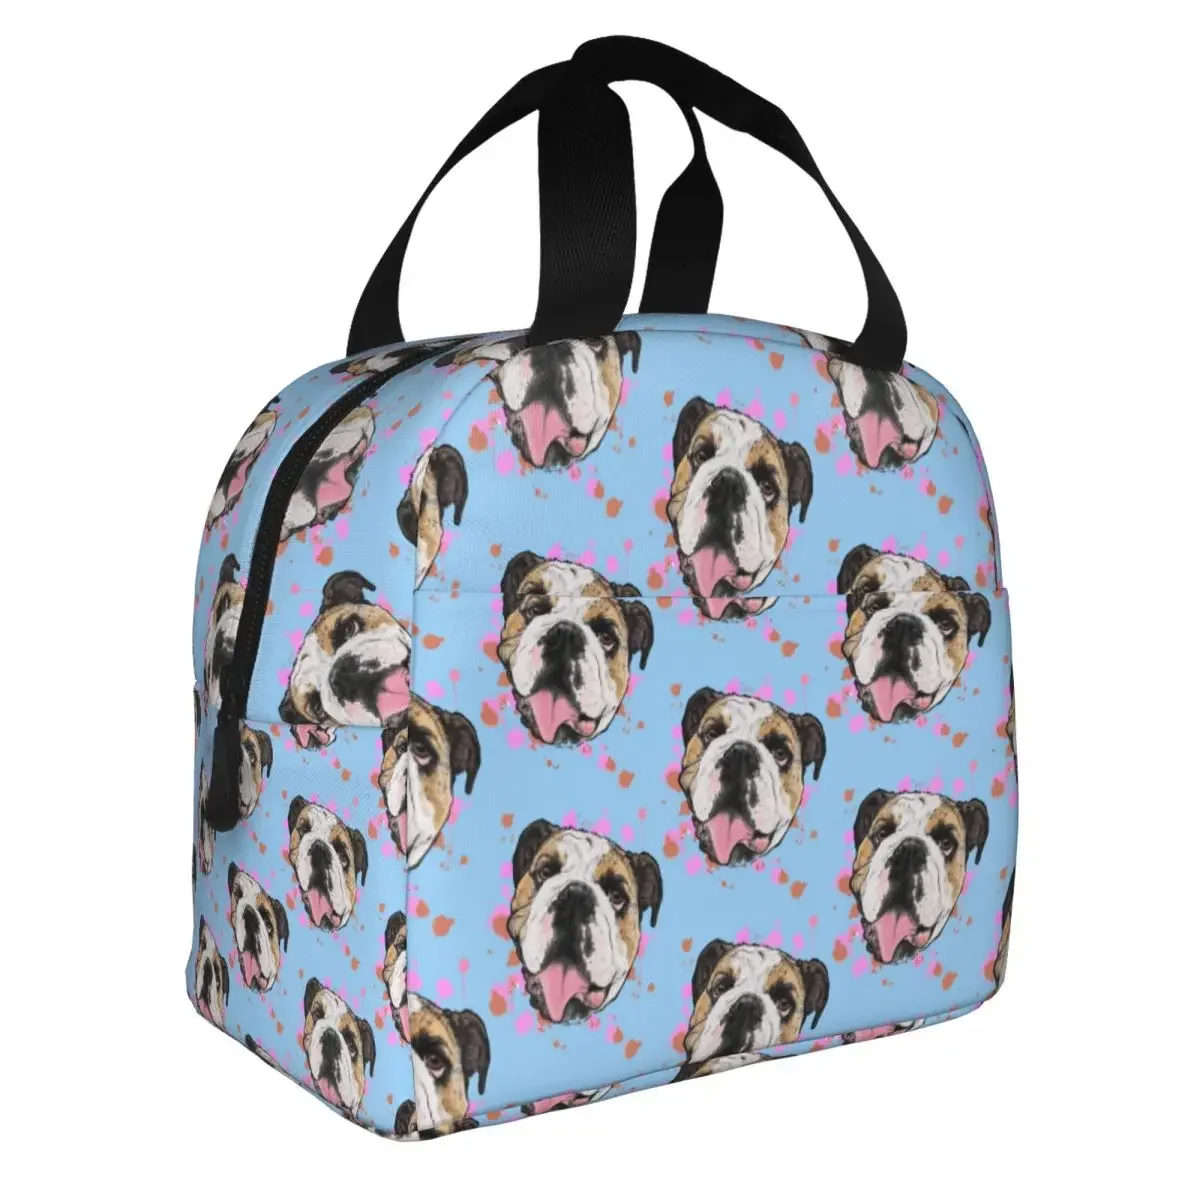 

British Dog English Bulldog Lunch Box for Women Portable Leakproof Cooler Thermal Food Insulated Lunch Bag Kids School Children